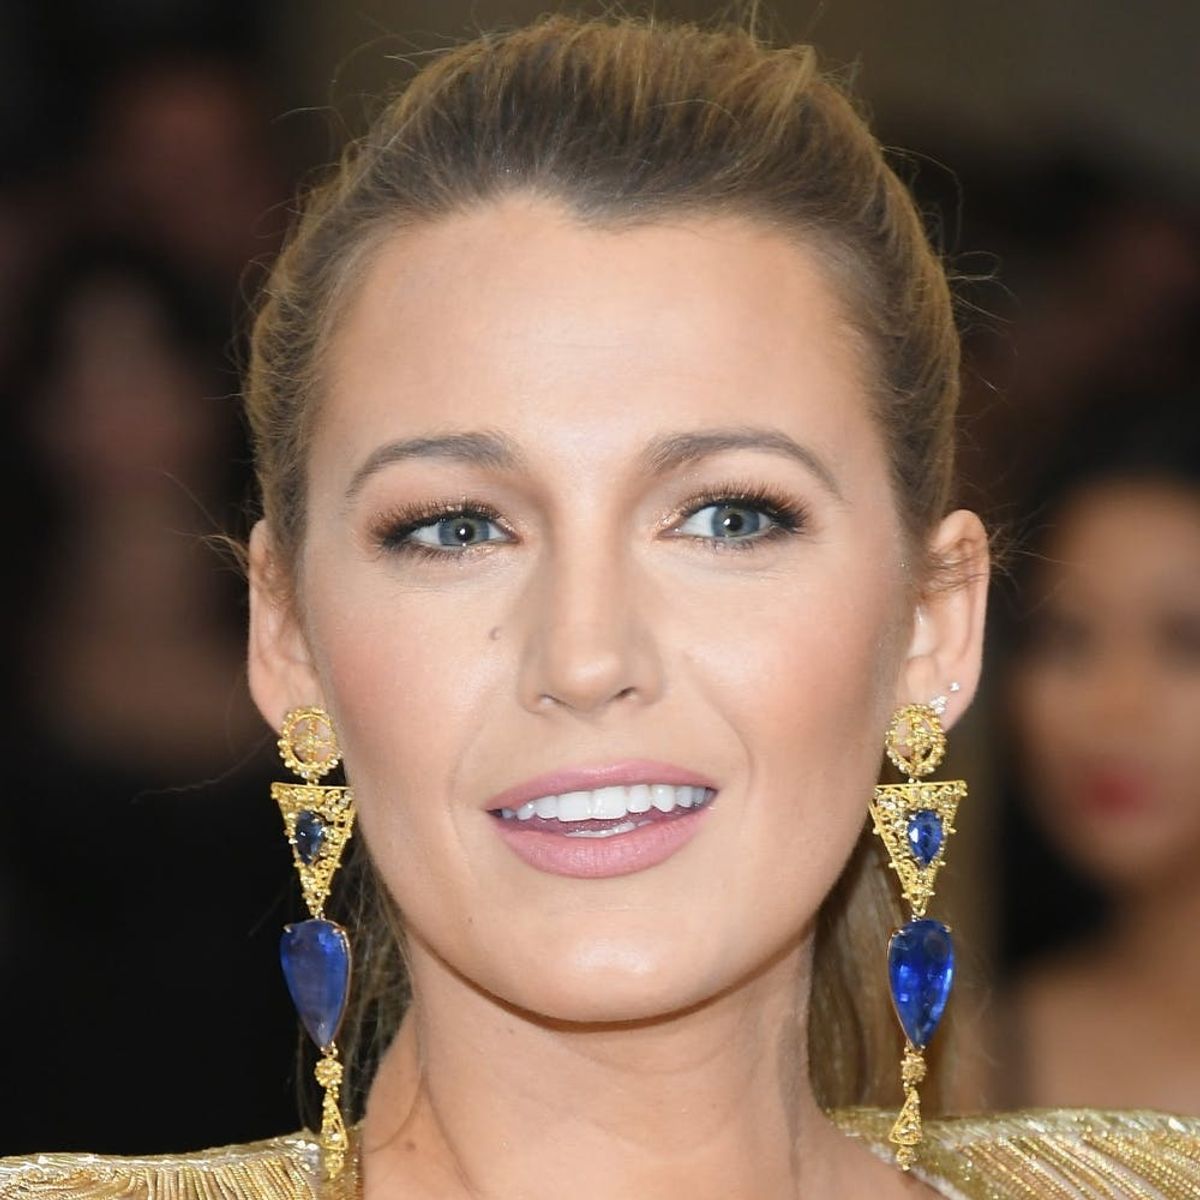 Blake Lively Will Play the Lead in a New Film from the Author of Big Little Lies